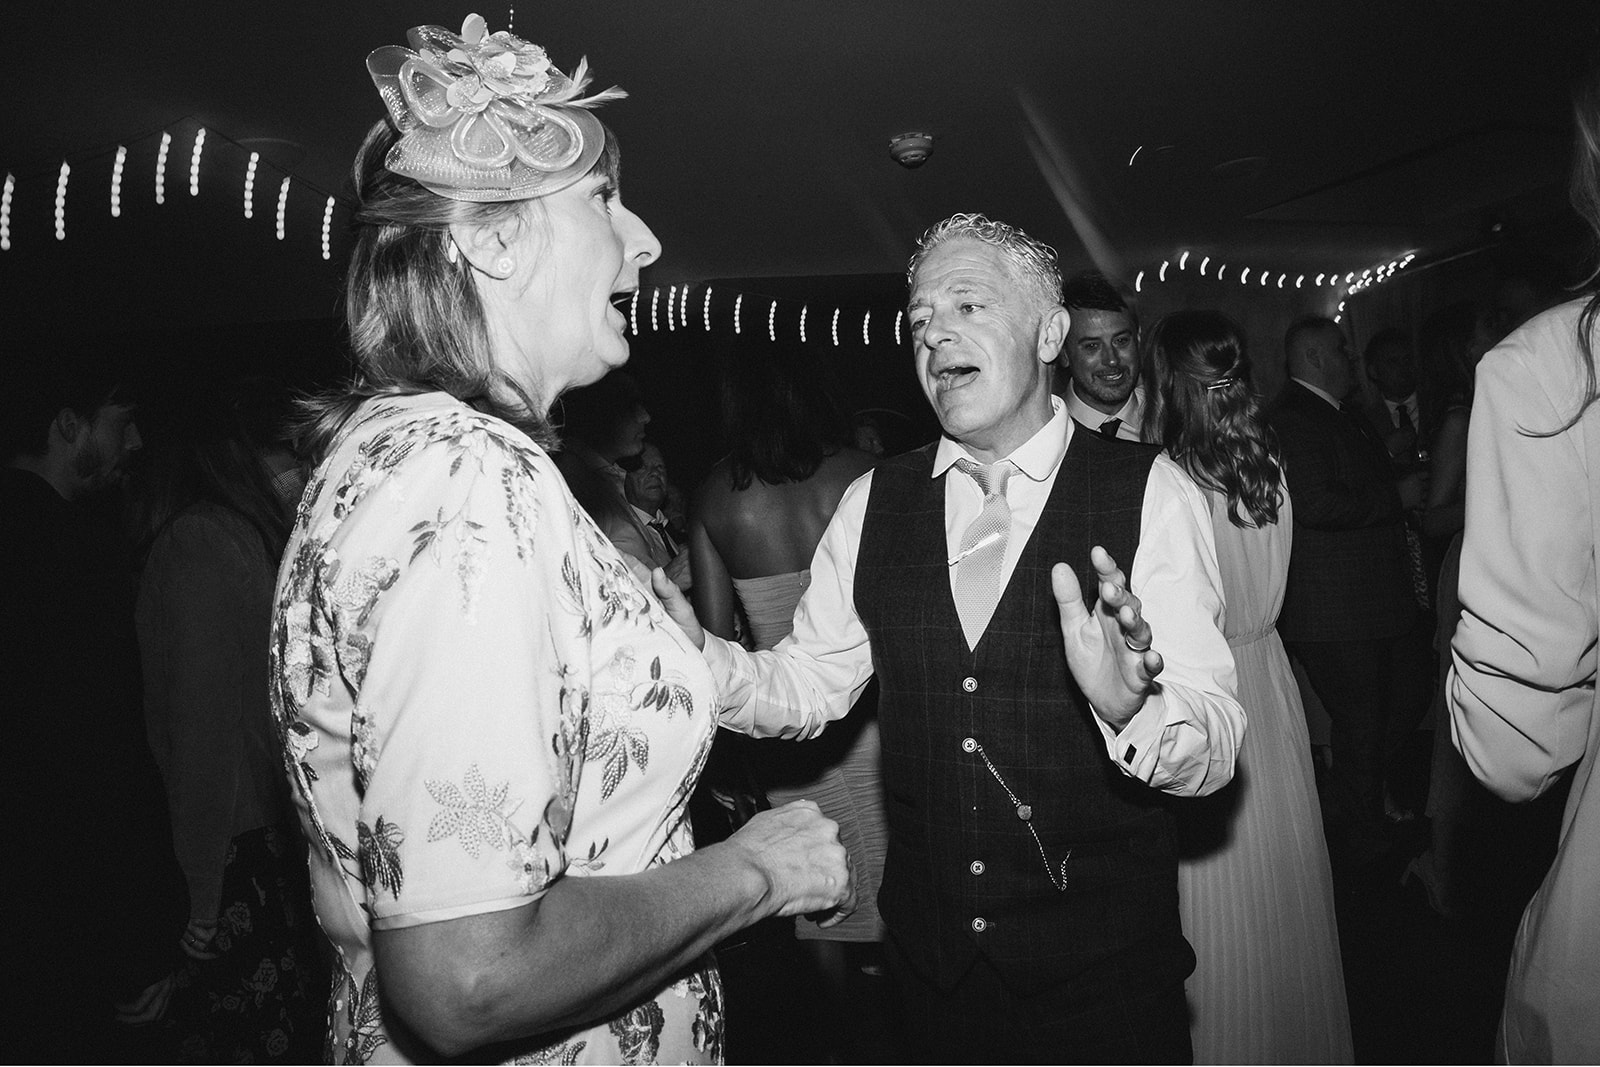 The Chequers Inn Wedding Photography - the wedding guest dance to the wedding DJ